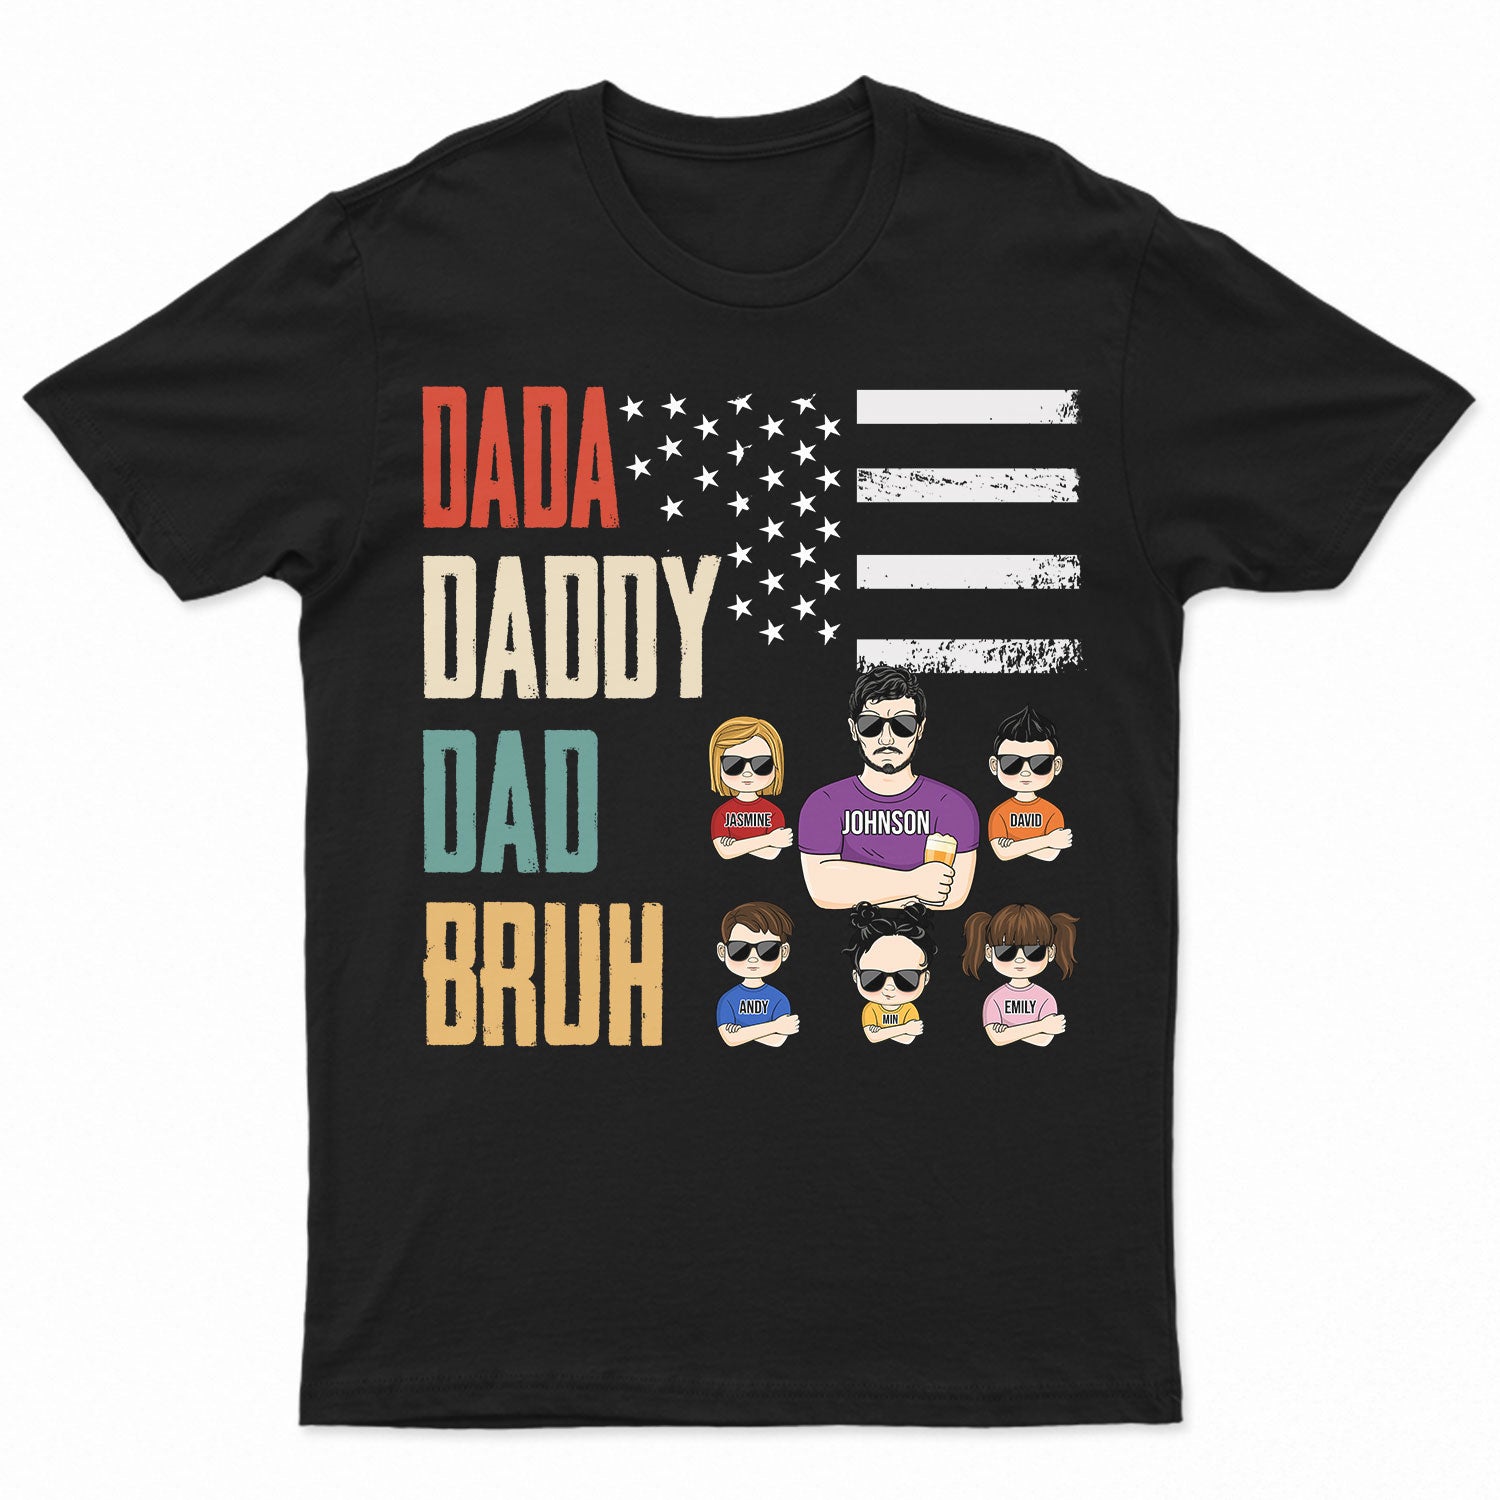 Dada Daddy Dad Bruh - Birthday, Loving Gift For Father, Grandpa, Grandfather, Husband, Daughters, Sons - Personalized Custom T Shirt